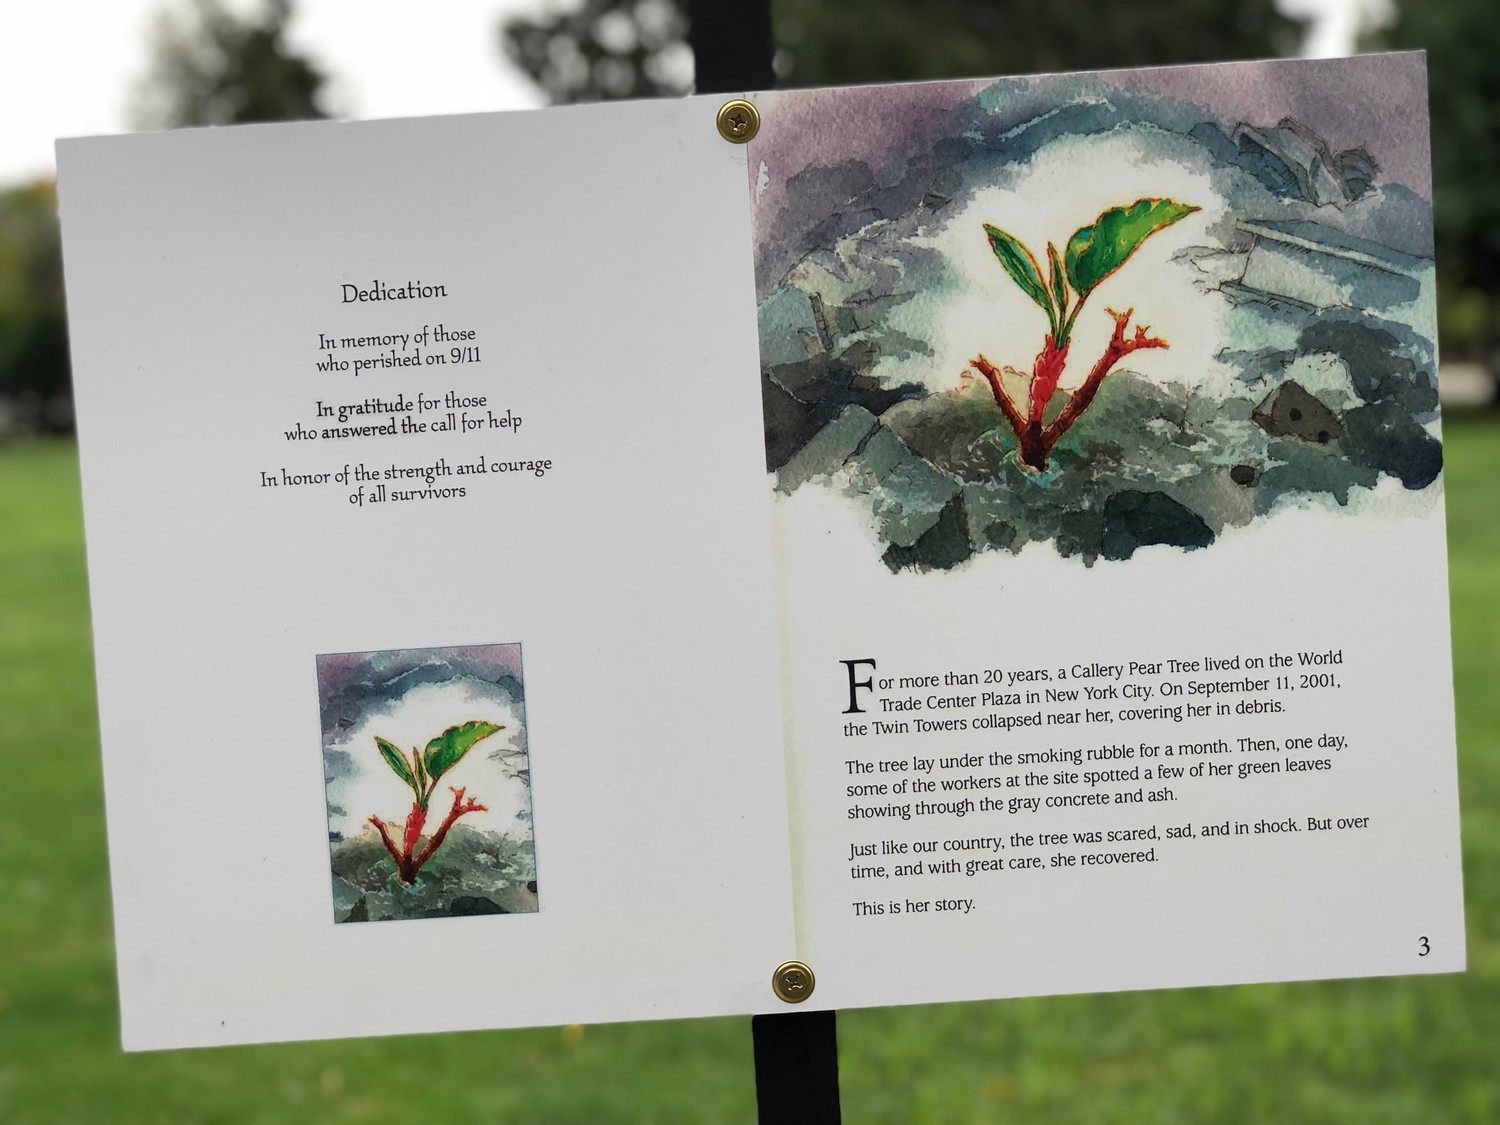 The story of the tree that survived the collapse of the World Trade Center on Sept. 11, 2001, is posted around the Village Green.